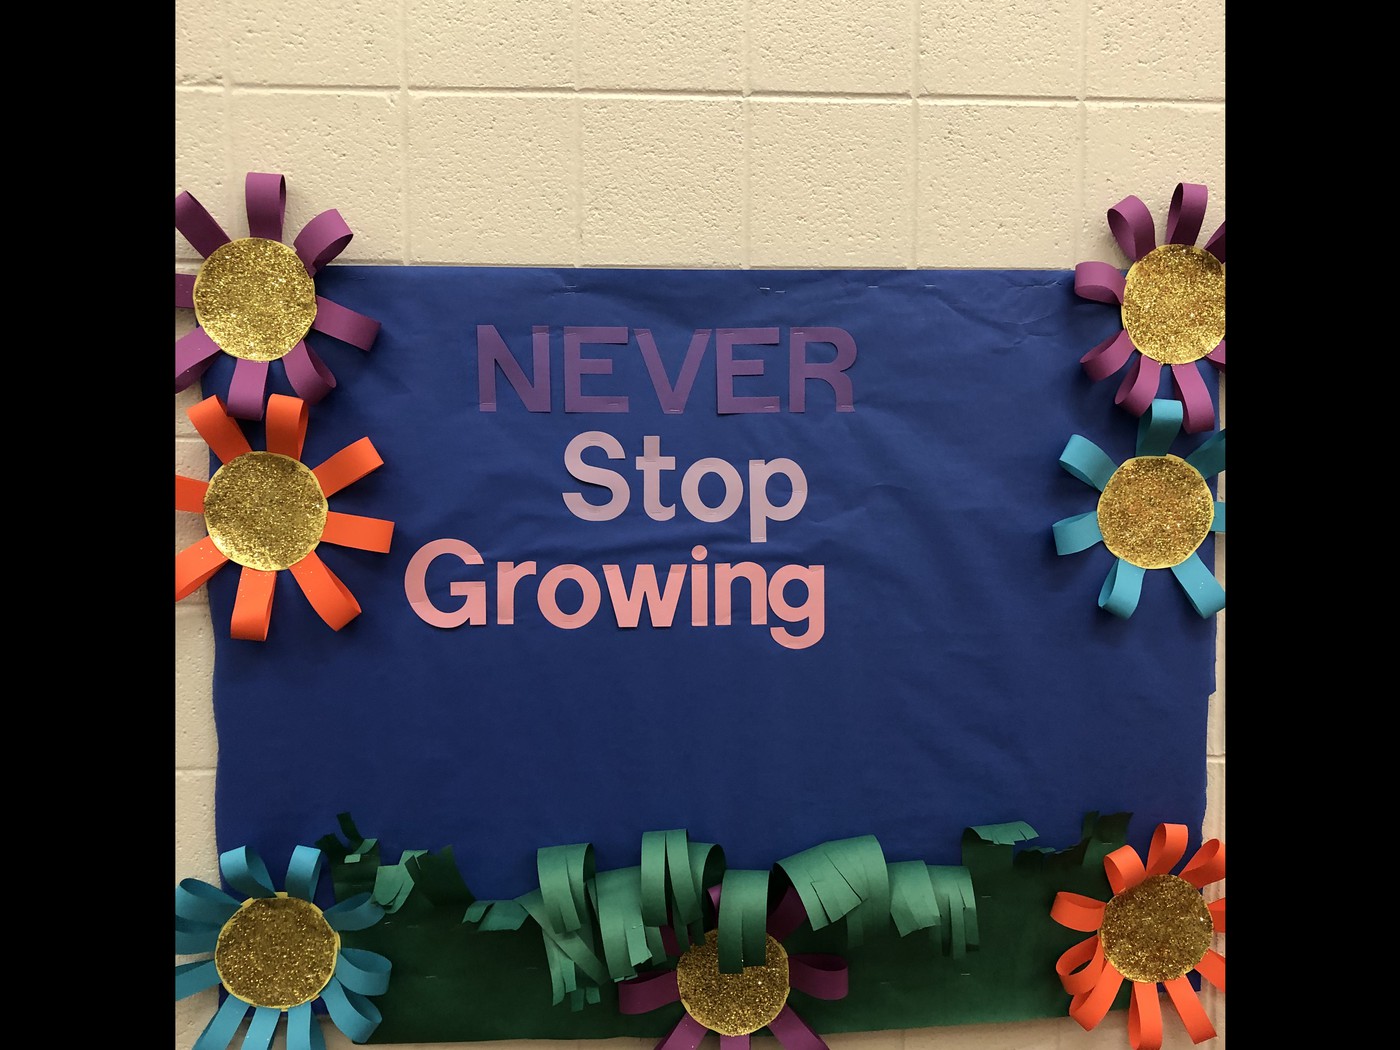 Our youngest learners are growing like beautiful spring flowers!